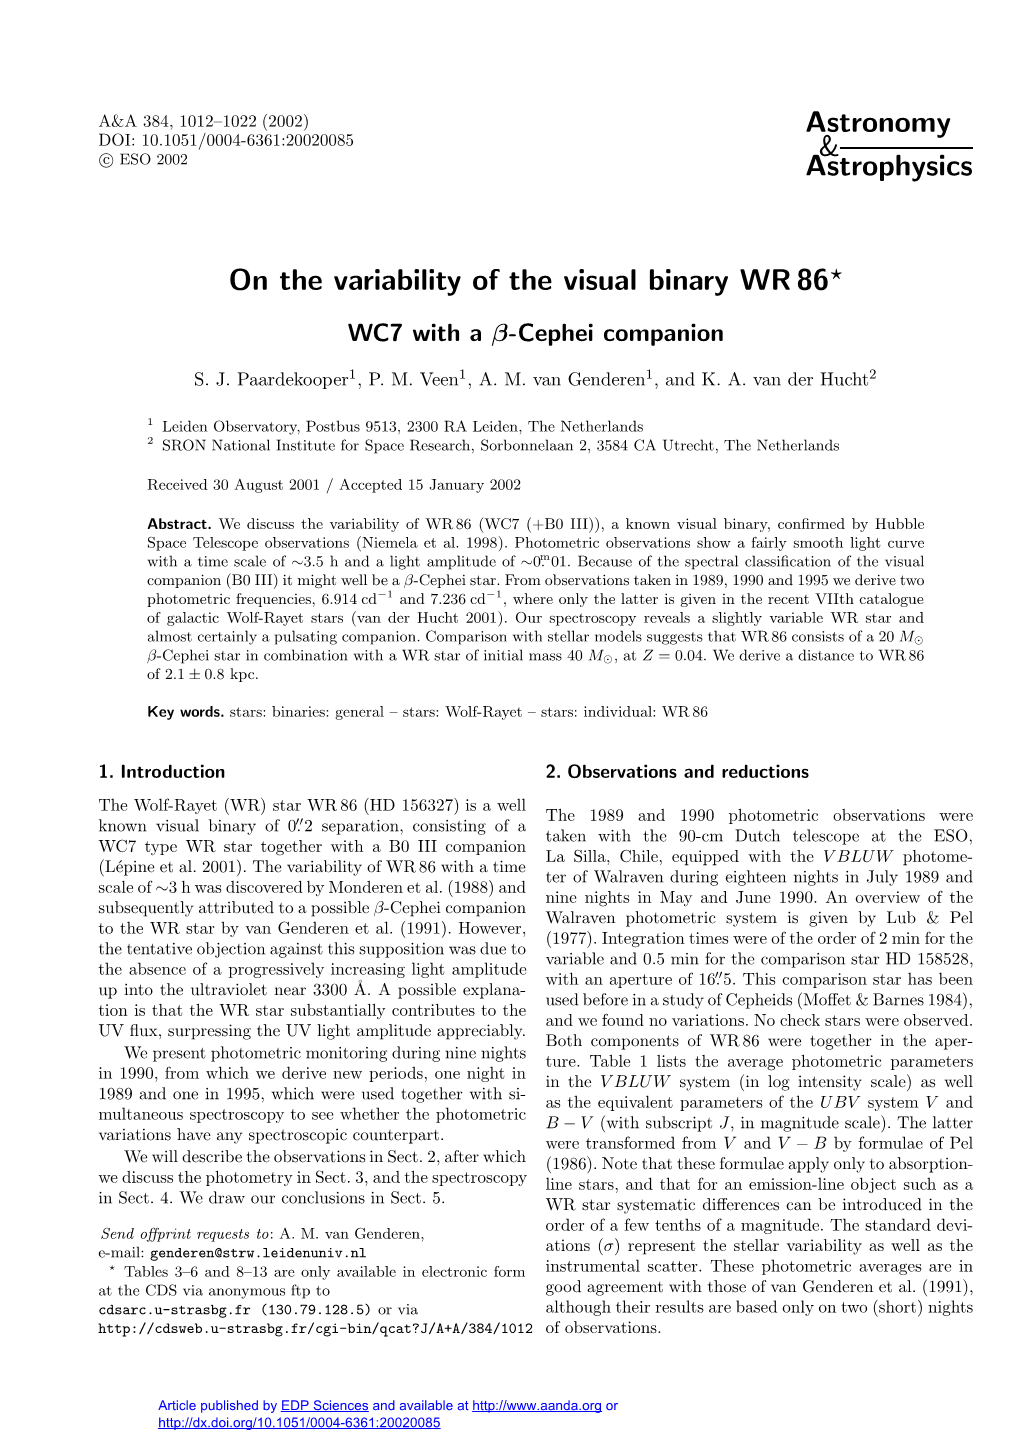 On the Variability of the Visual Binary WR 86?